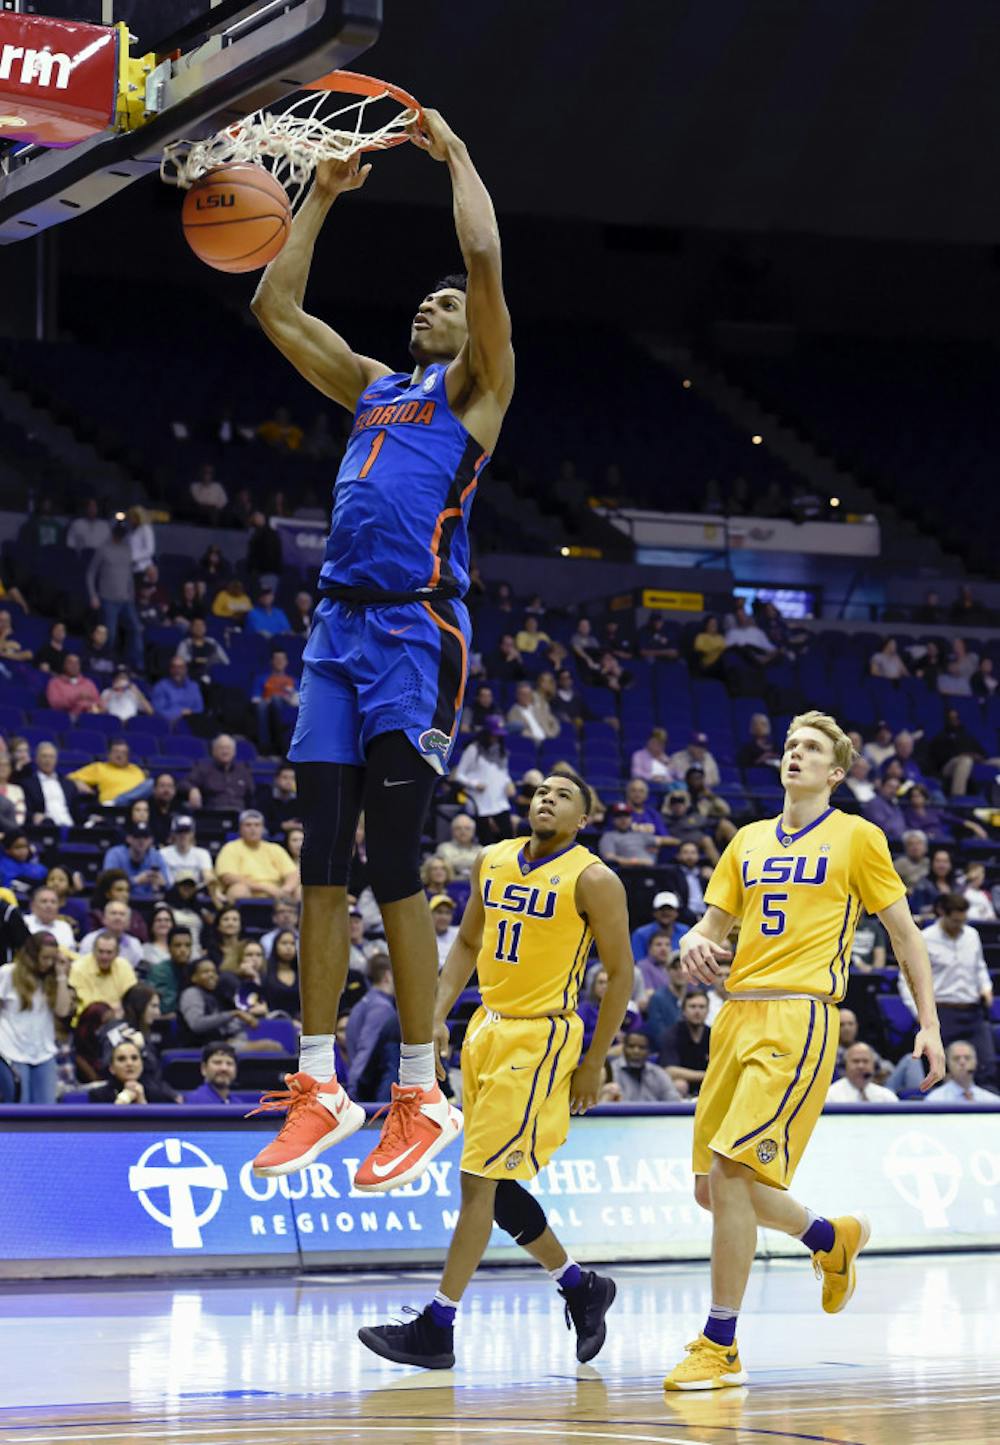 <p>Florida forward Devin Robinson (1) dunks the ball for two of his game high 24-points as LSU guard Jalyn Patterson (11) and LSU guard Kieran Hayward (5) watch in the second half of an NCAA college basketball game, Wednesday, Jan. 25, 2017, in Baton Rouge, La. Florida won 106-71. (AP Photo/Bill Feig)</p>